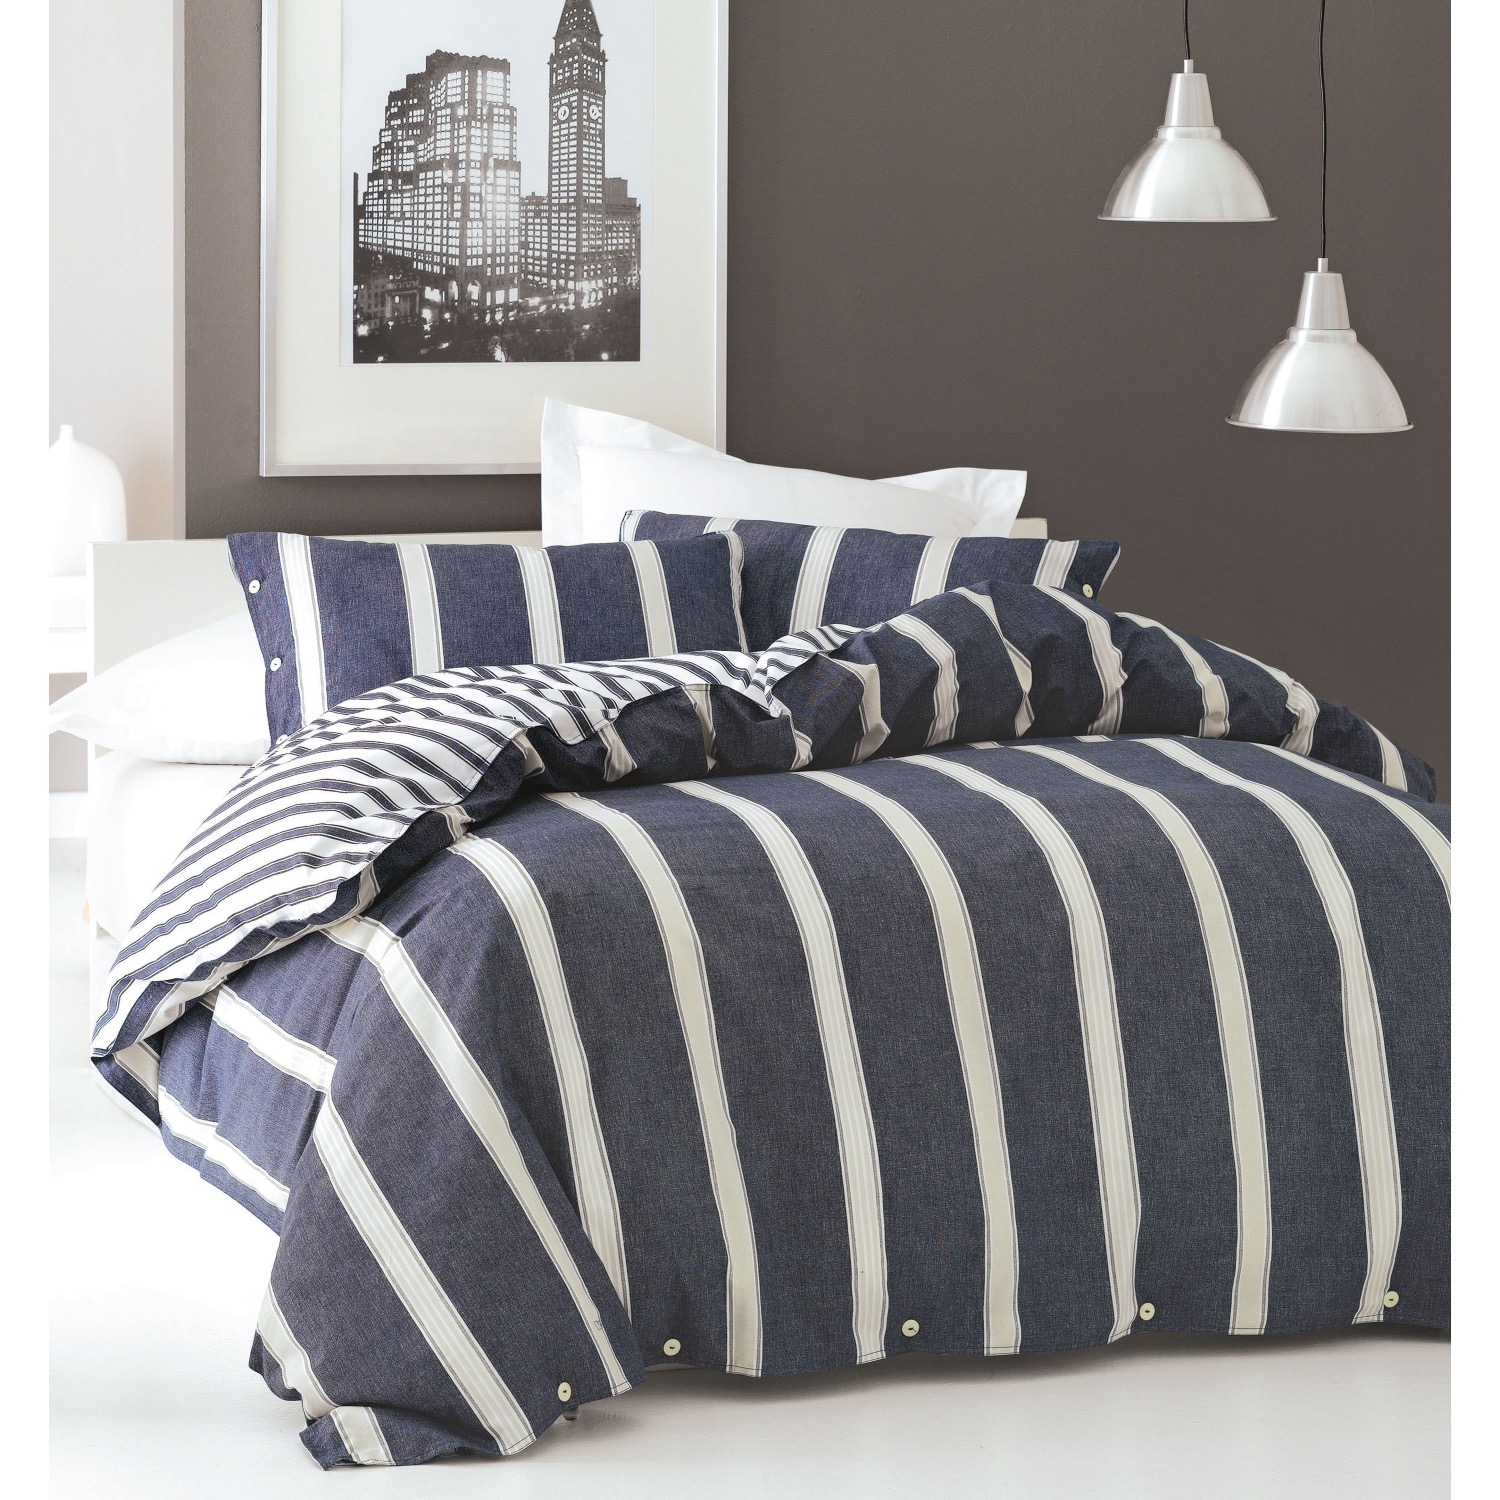 Sandler quilt cover in a preppy striped blue from Linen House available at Domayne